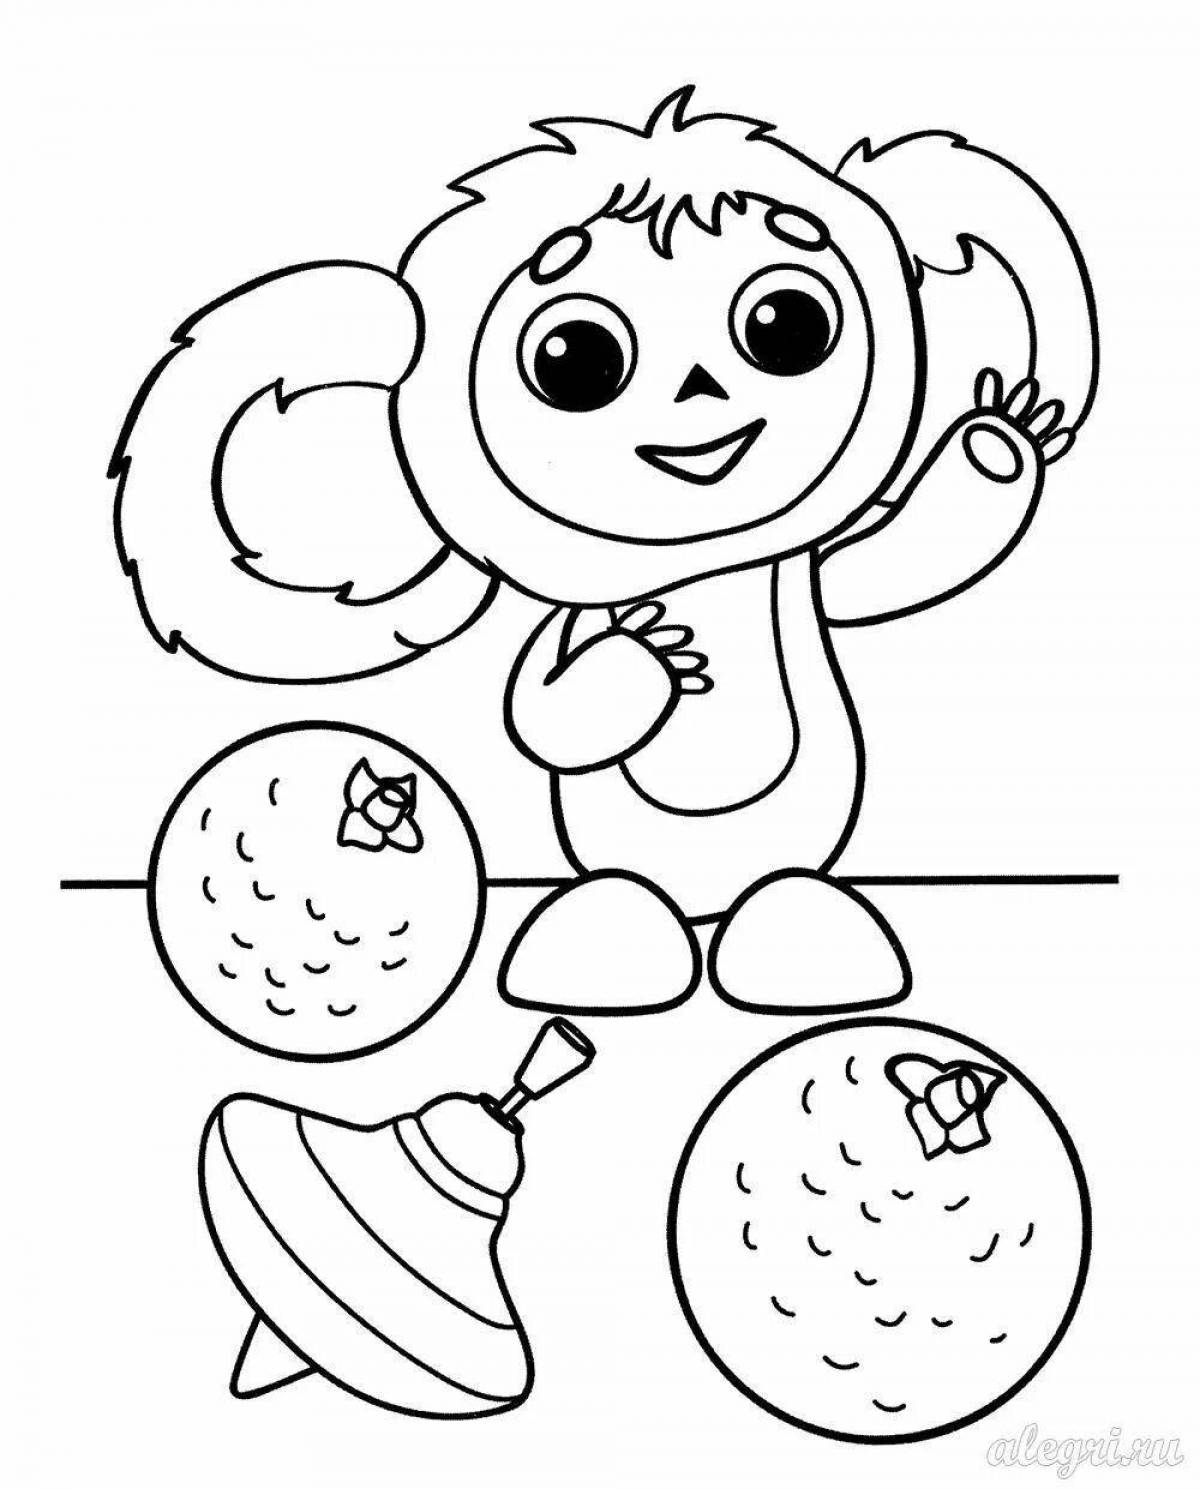 Colorful Cheburashka coloring book for the little ones